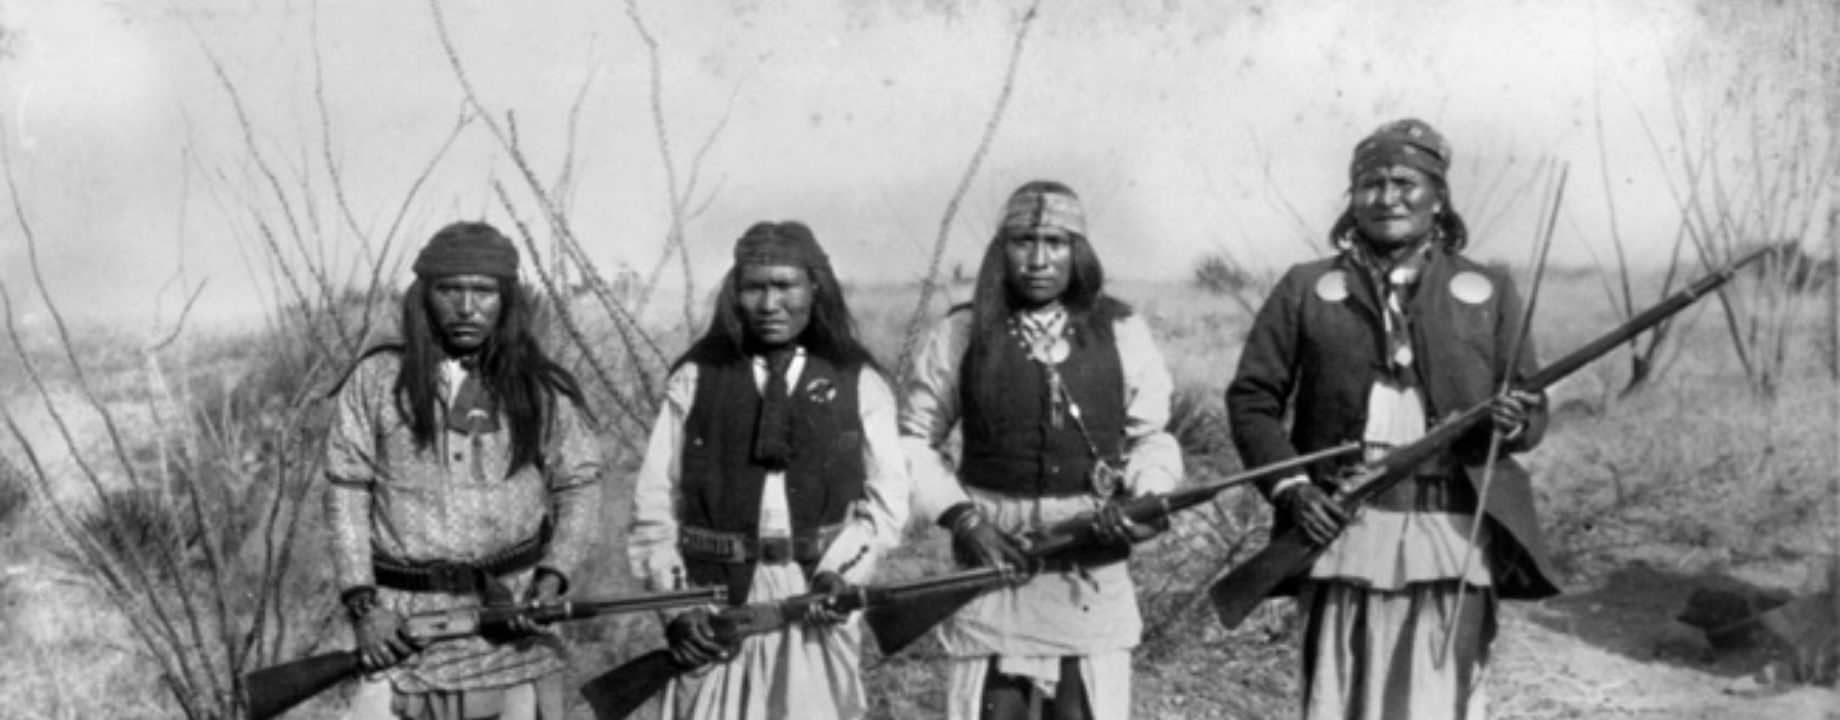 Apache chieff Geronimo right and his warriors in 1886